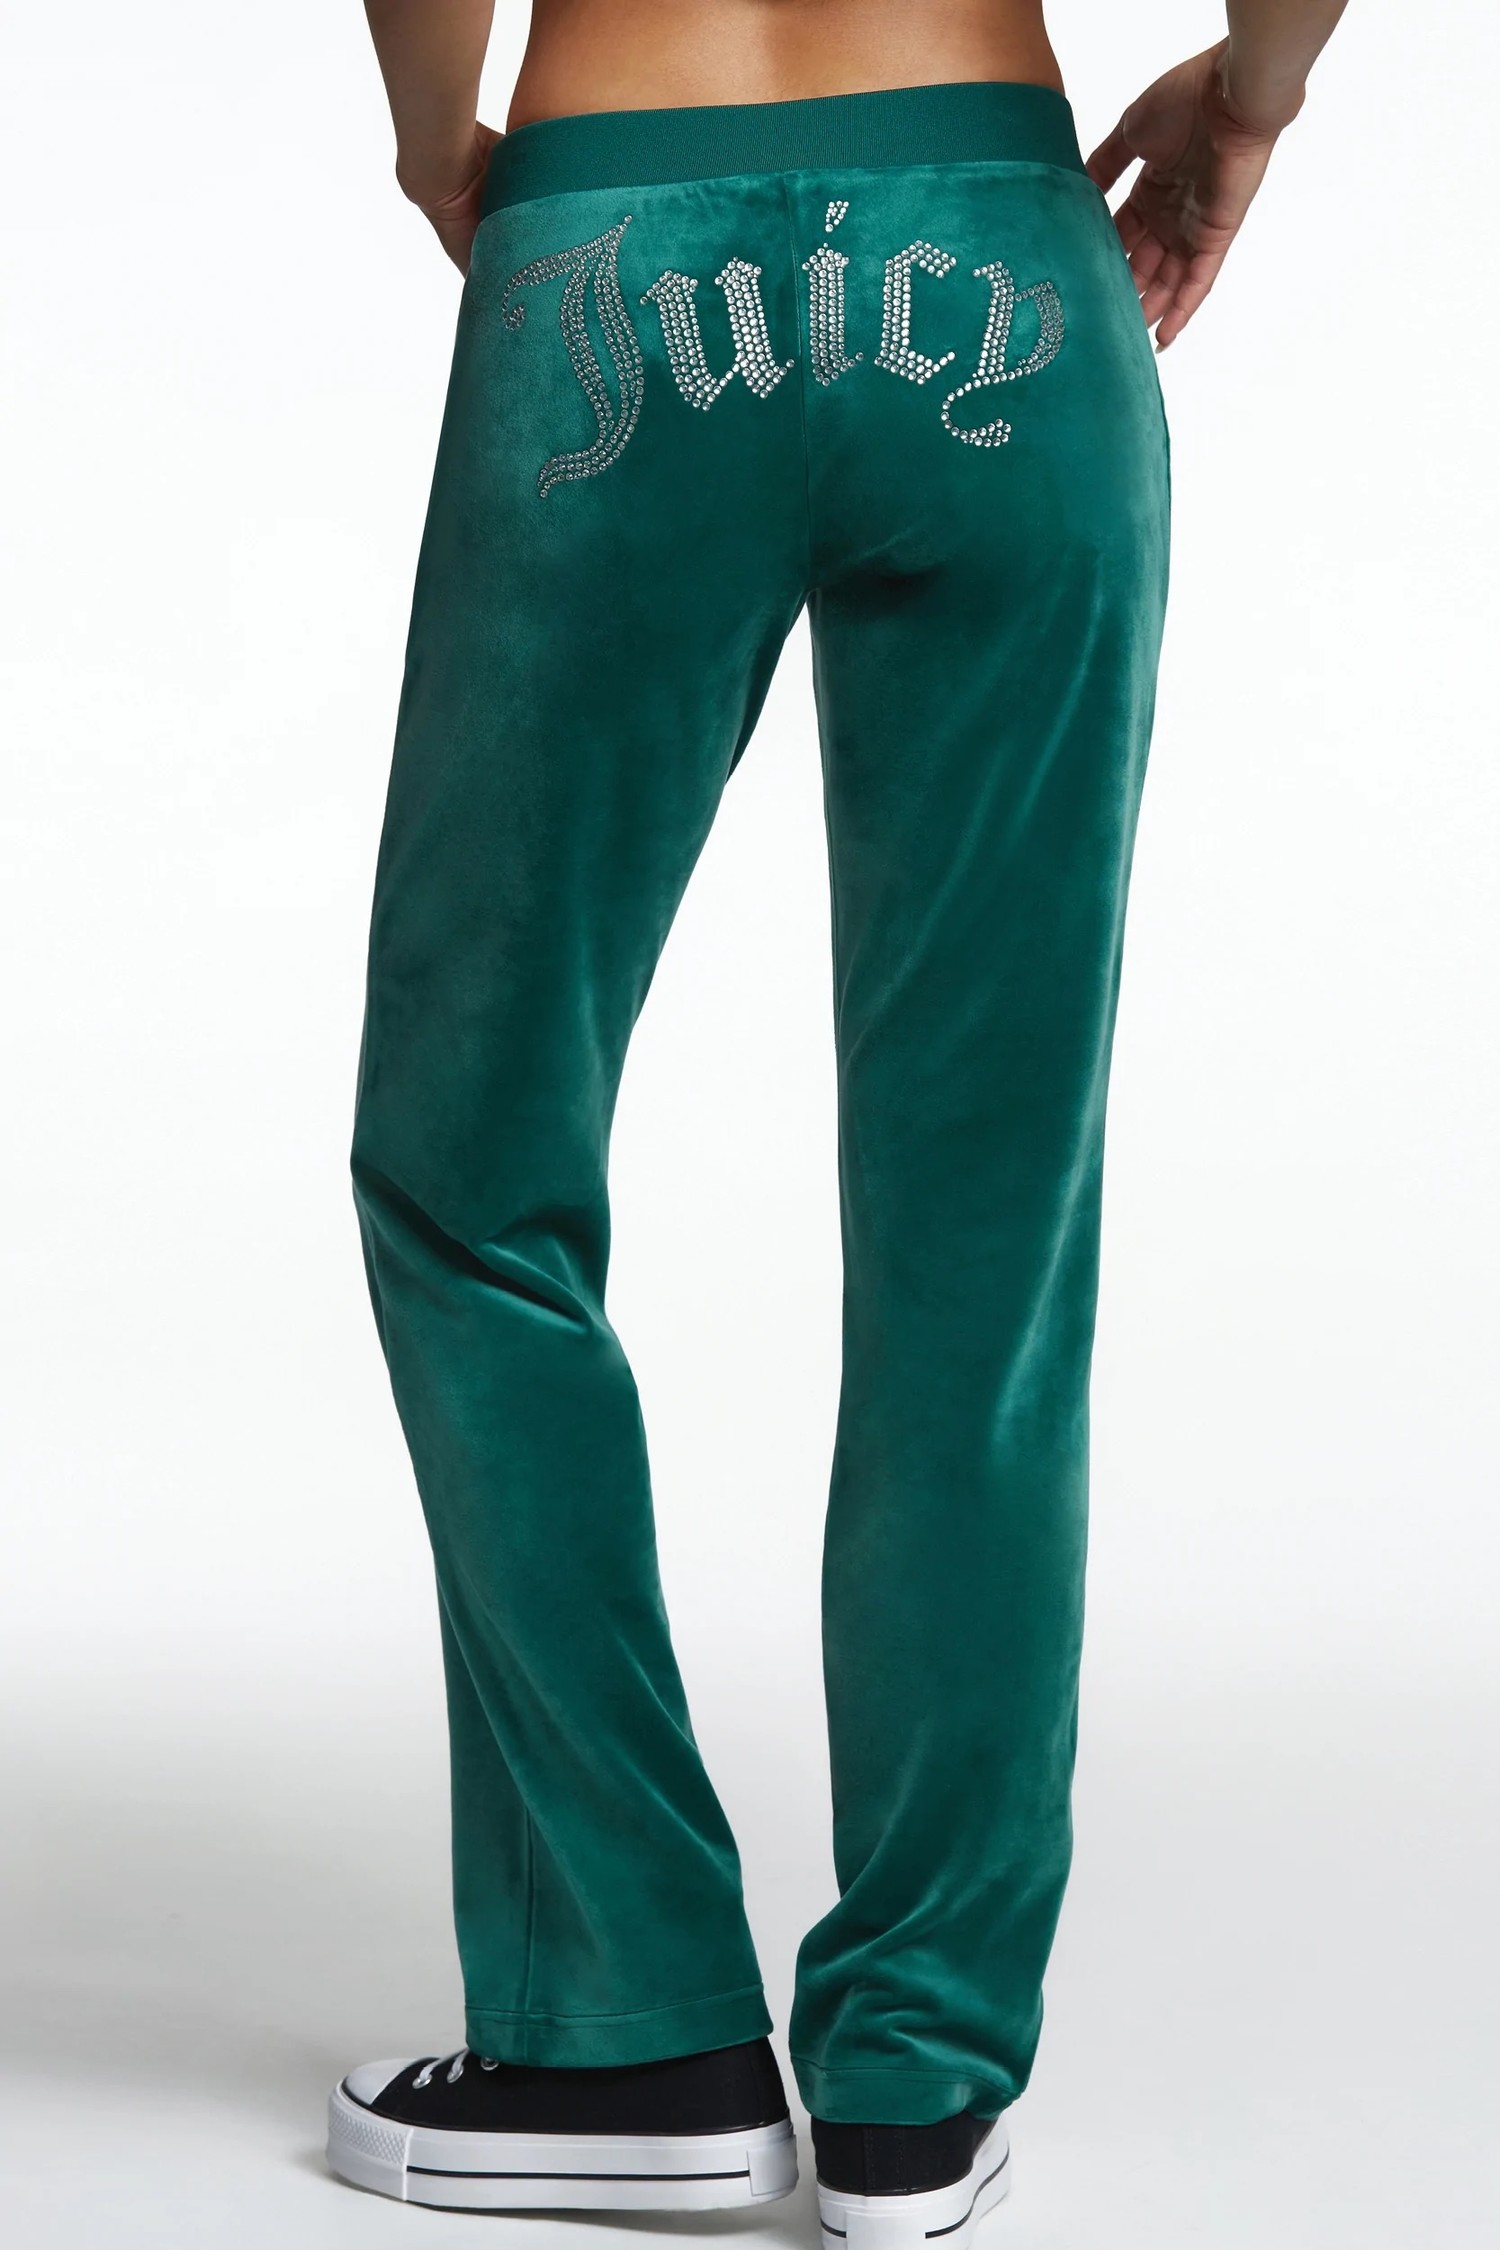 Juicy Couture Bling Velour Pants  Nordstrom